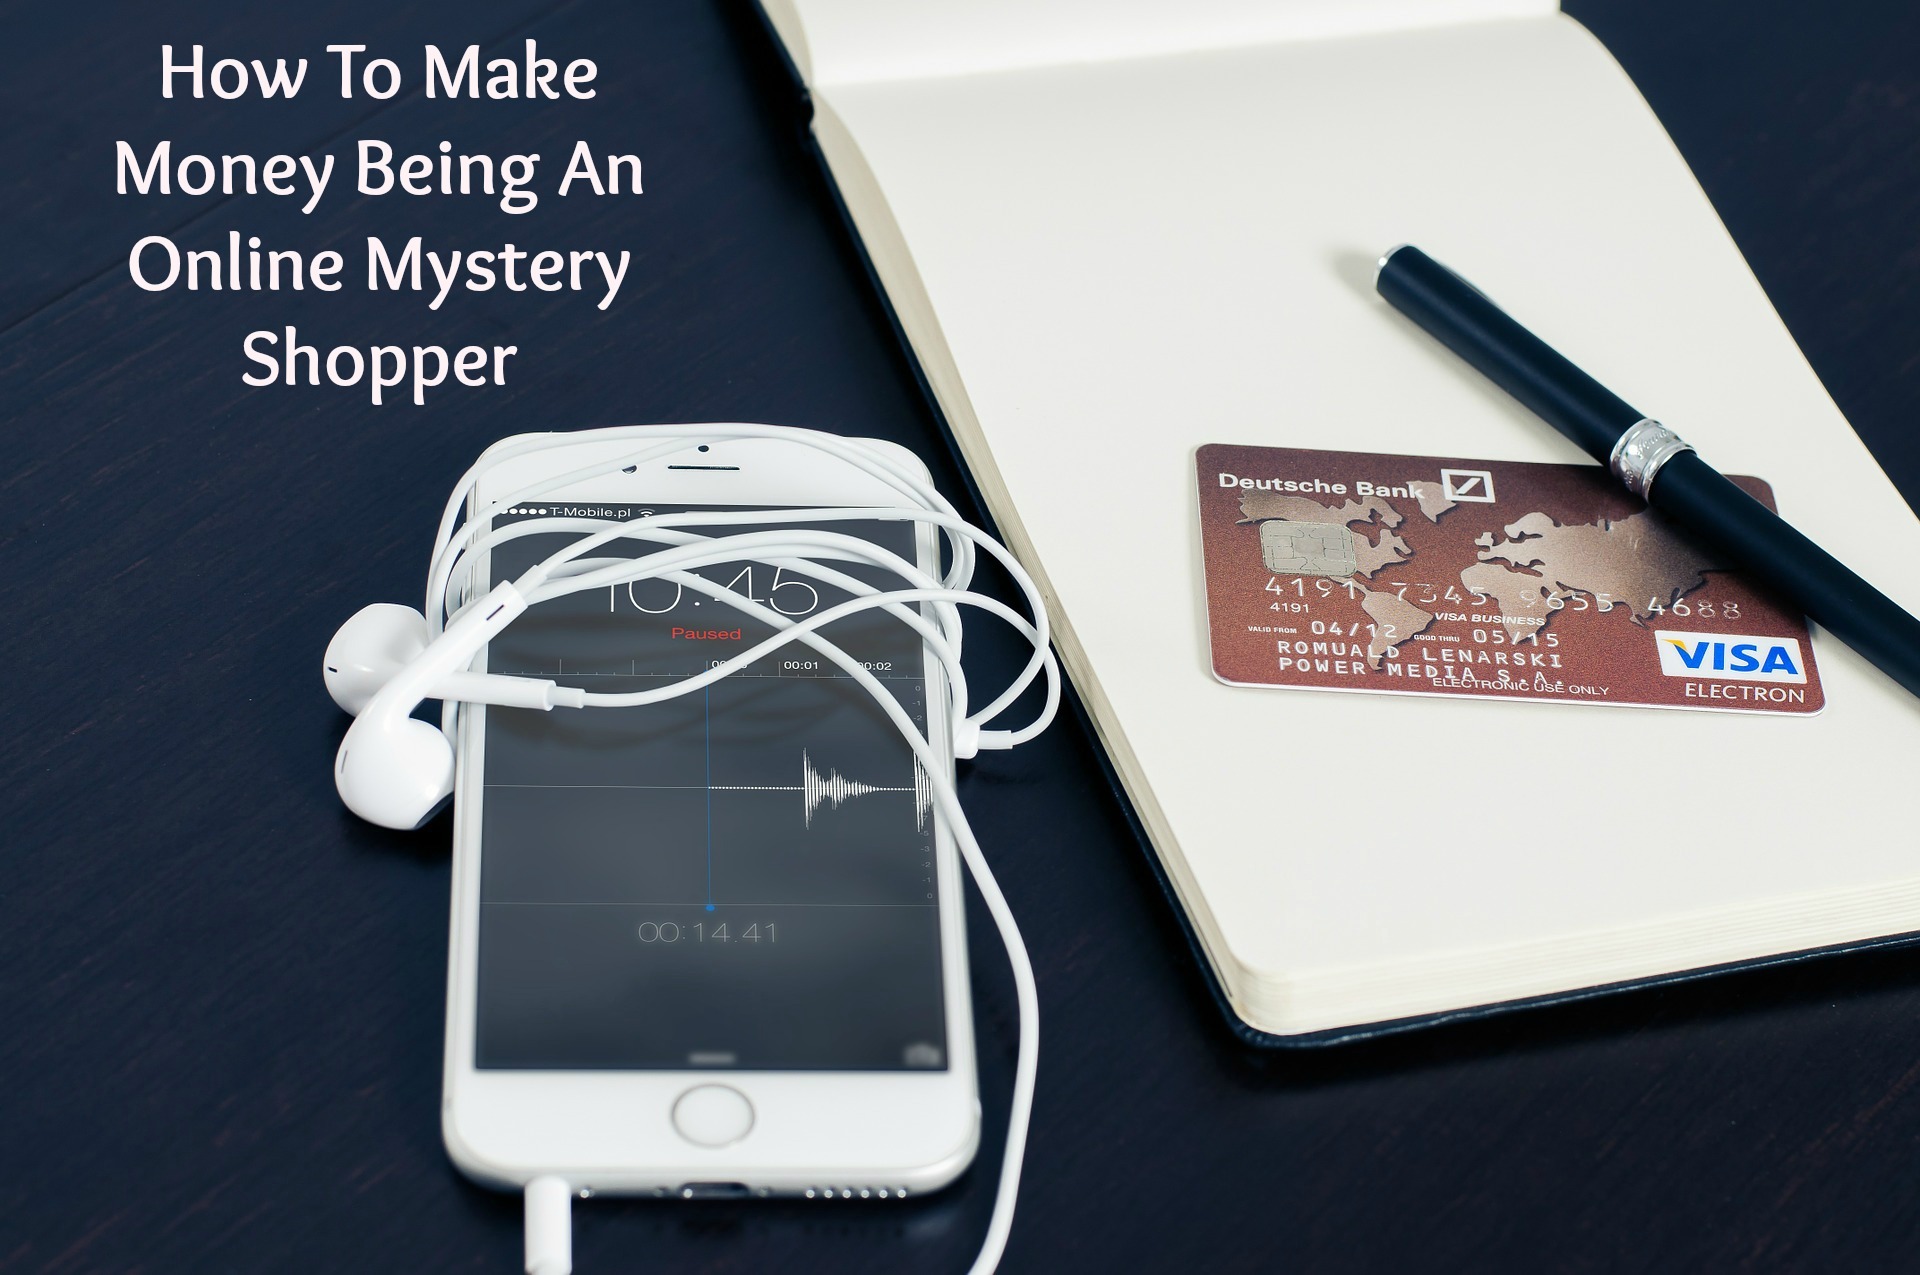 How To Make Money Being An Online Mystery Shopper